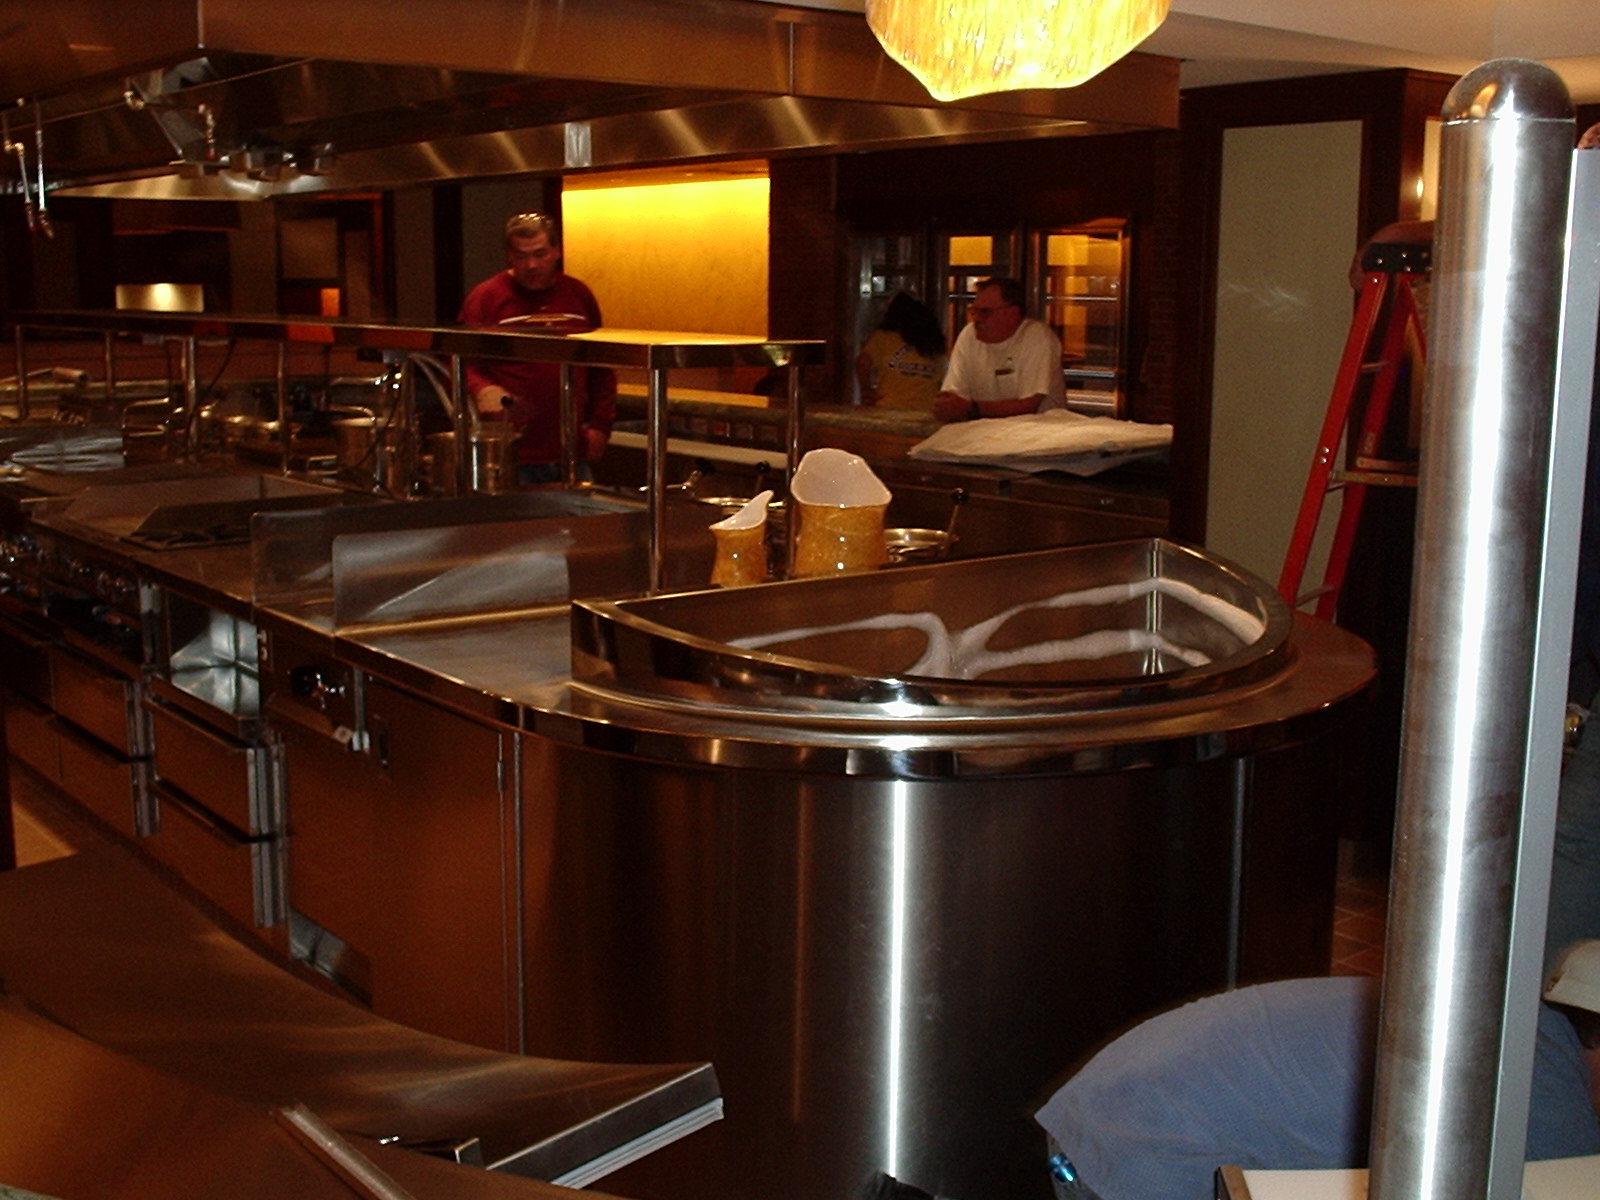 the restaurant kitchen has metal appliances and stainless steel sinks